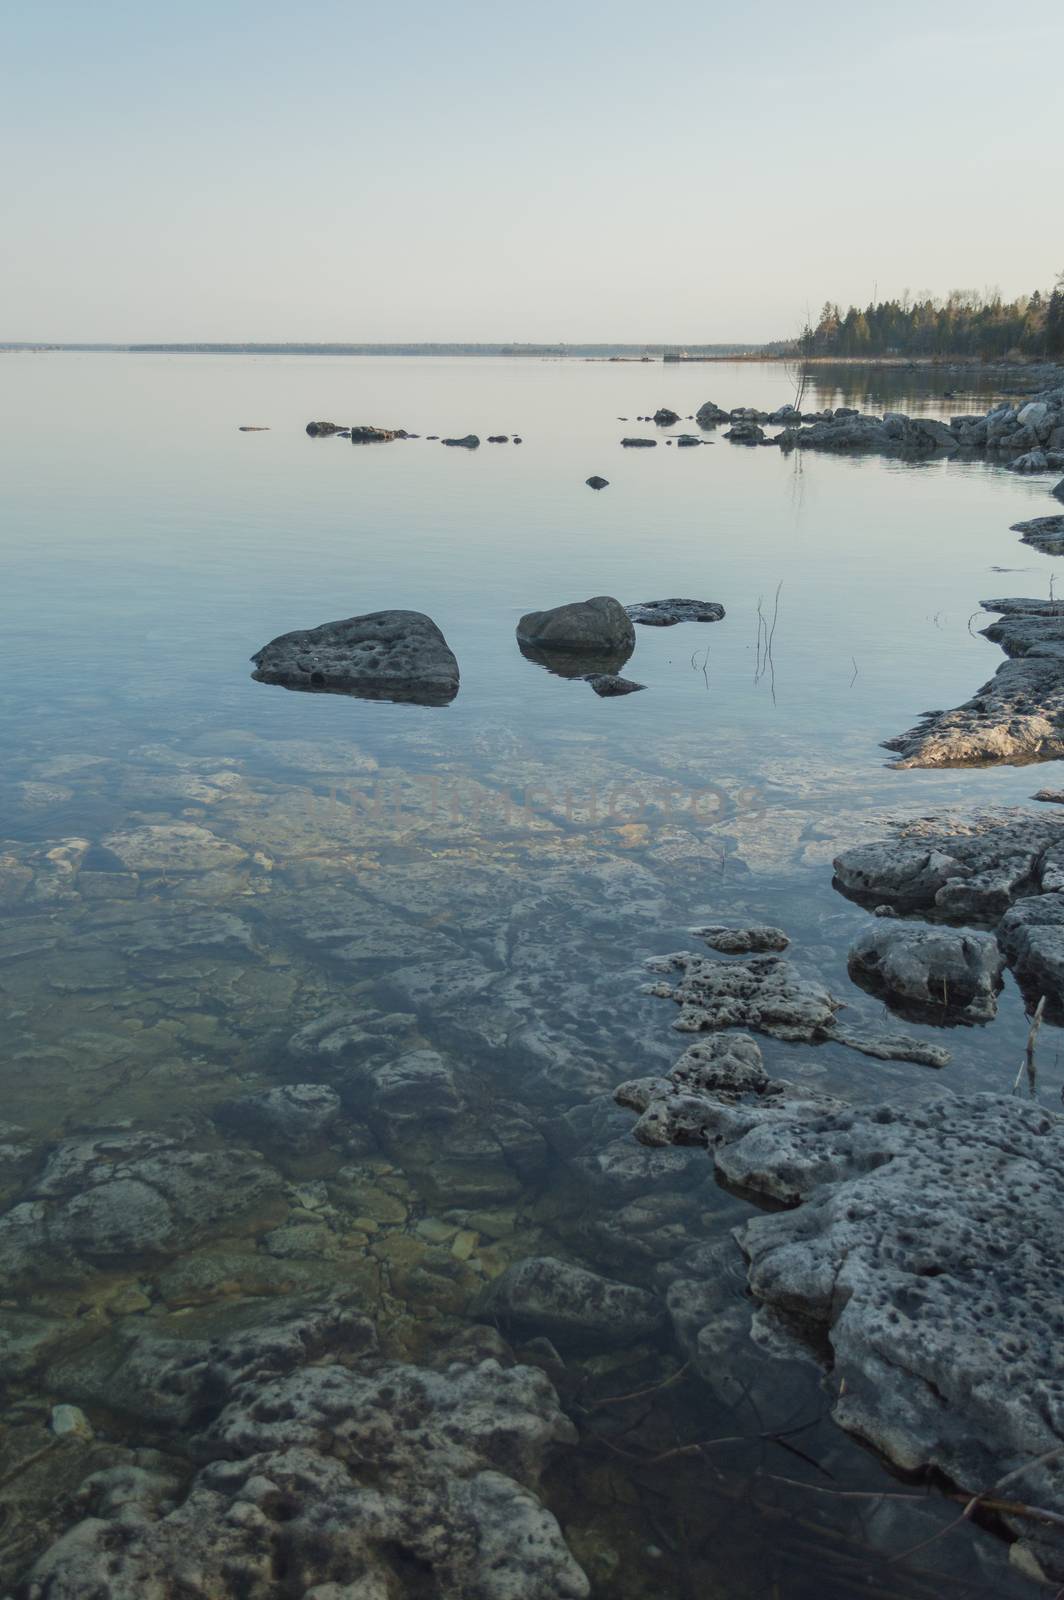 Dead calm morning image of shallow and clear lake huron water and limestone rocks along theshoreline.  A small tree-covered peninsula is on the horizon. Overall feeling is a calm, peaceful, tranquil, serene and wild background.